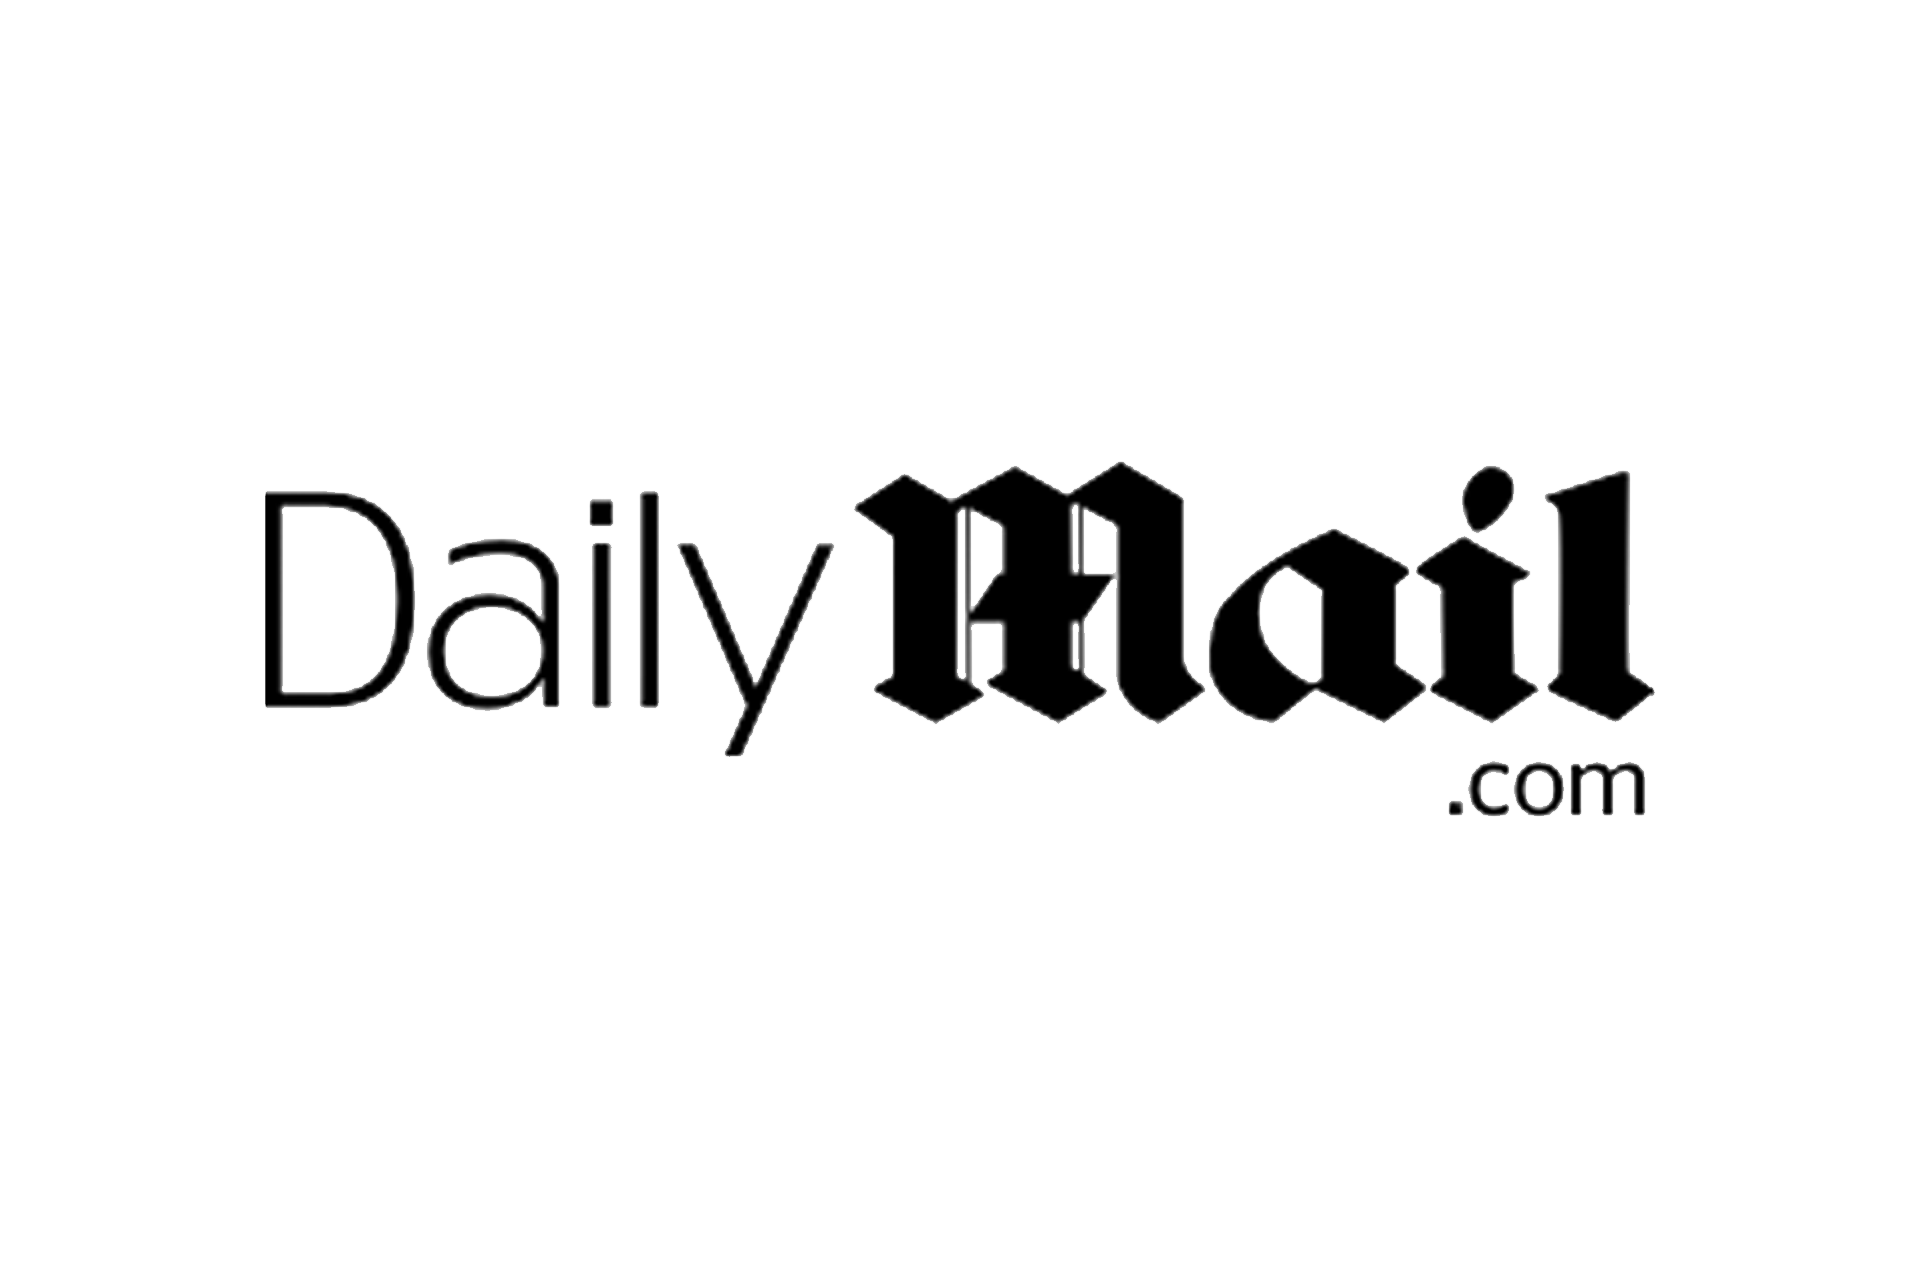 News_logos_0000_Daily-Mail.png